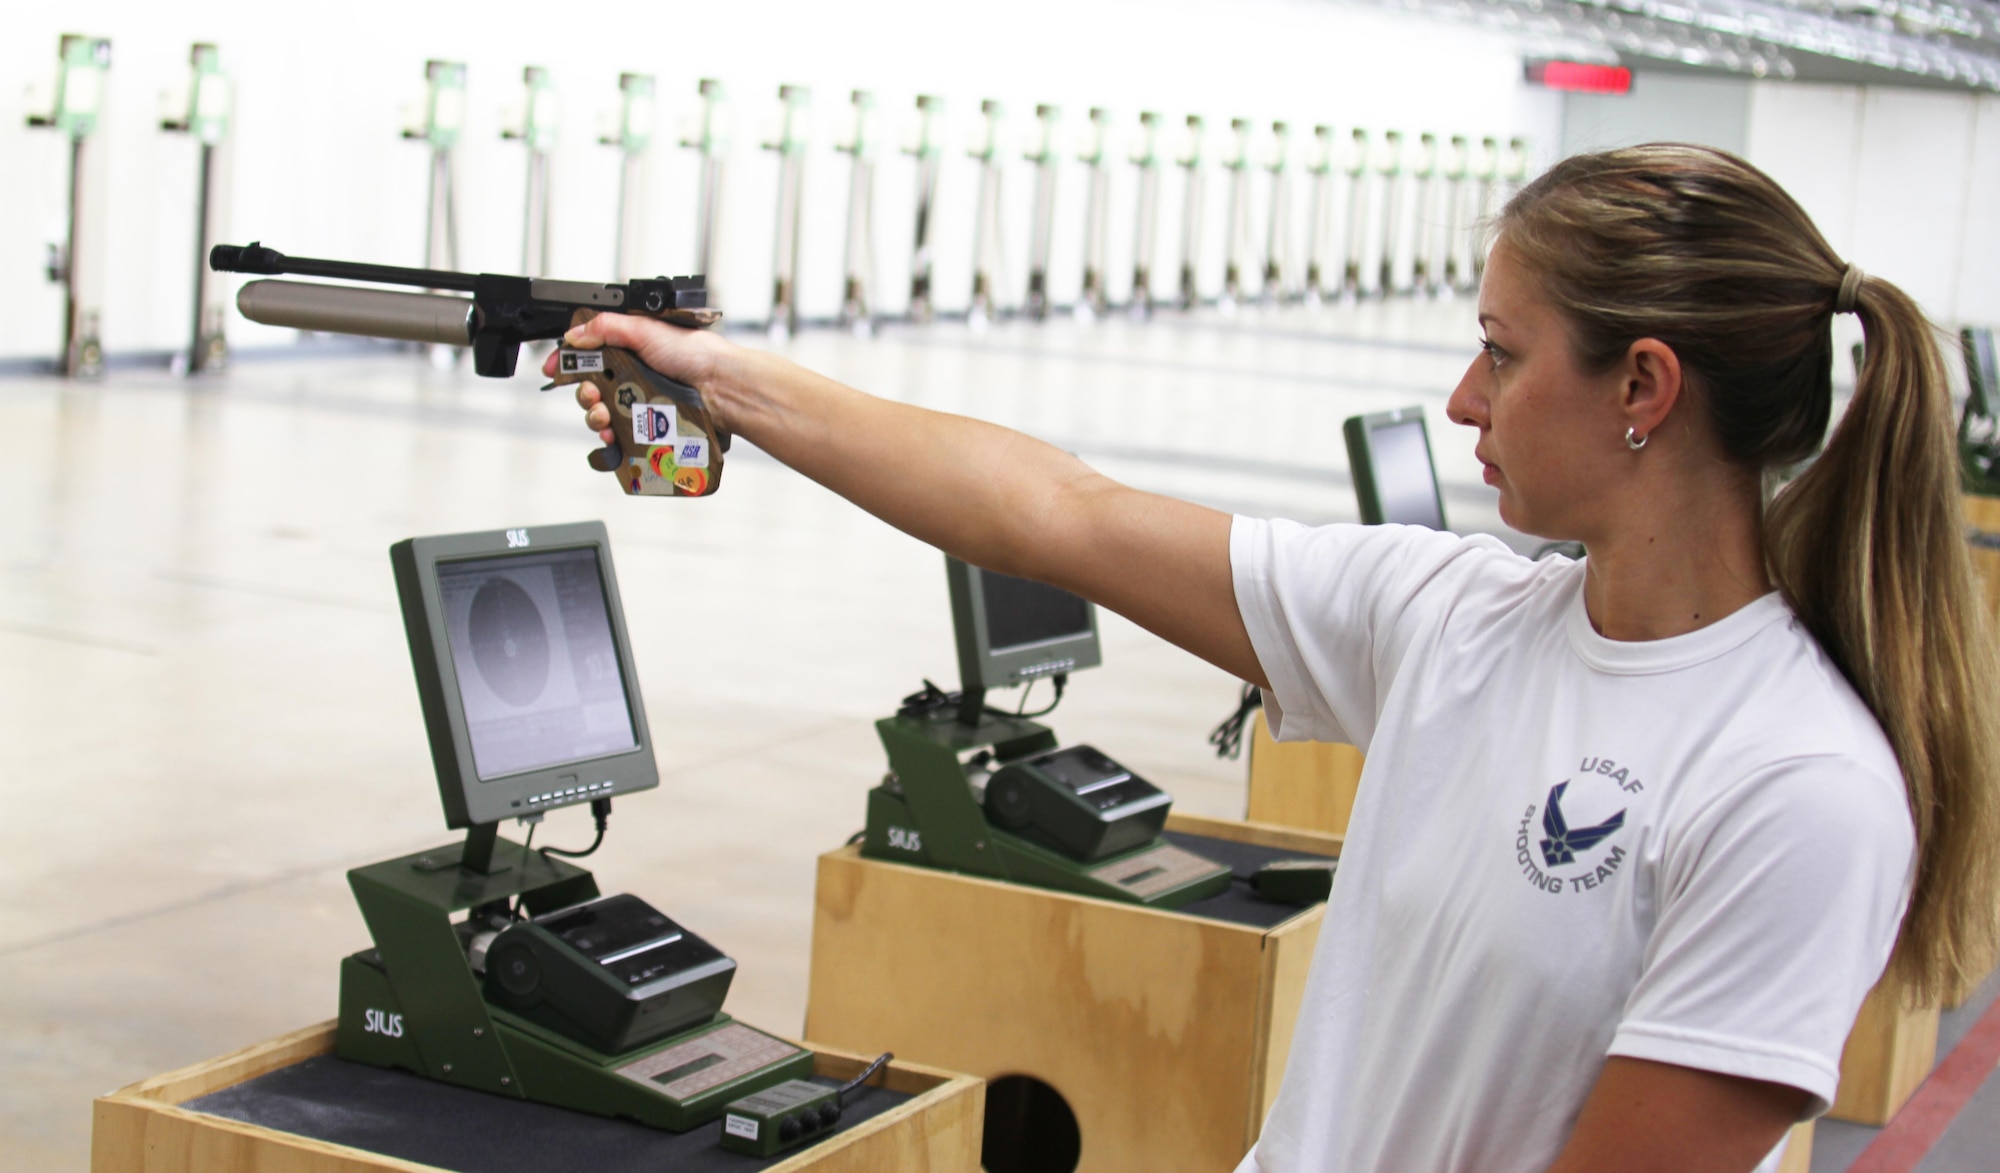 Capt. Caitlin Harris, an Individual Mobilization Augmentee and member of the Air Force International Shooting team, took first in her division at the 2015 Shooting National Championship, earning a pre-qualification to the 2016 U.S. Olympic Trials.